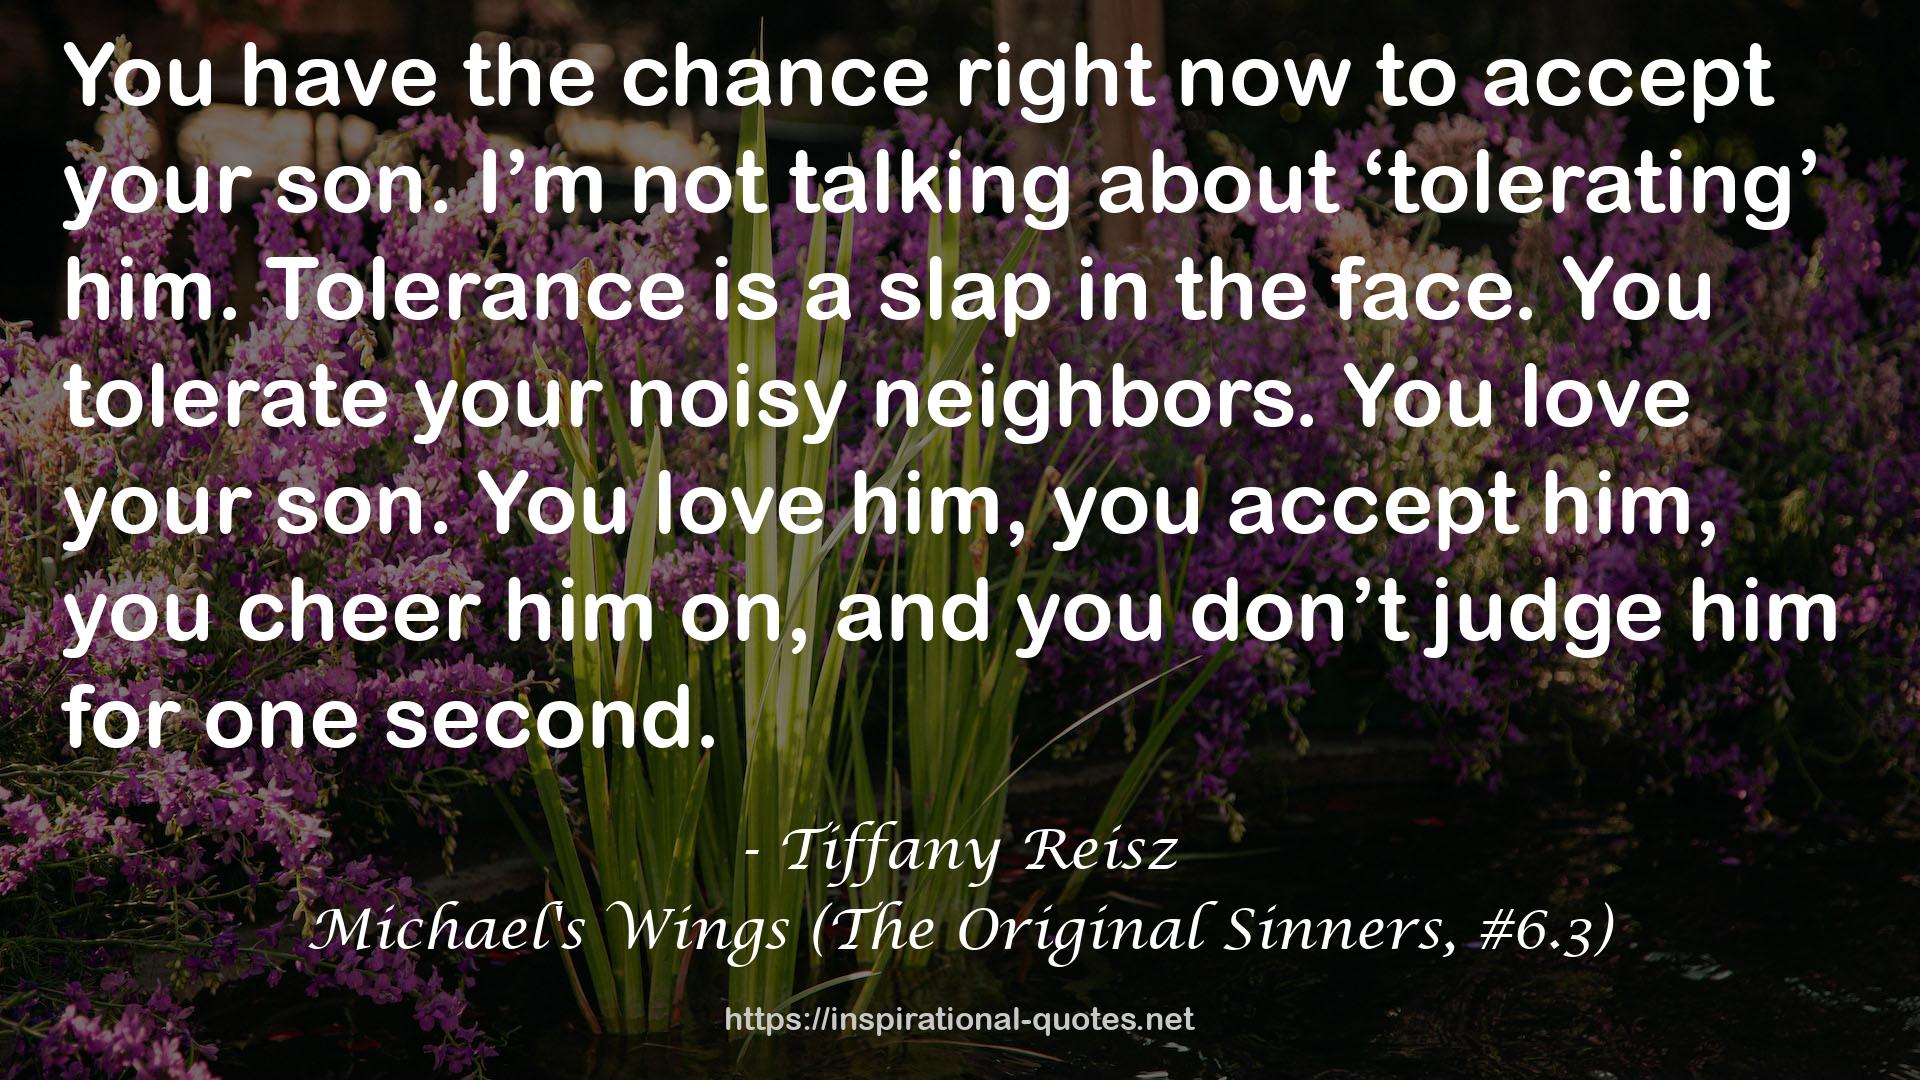 Michael's Wings (The Original Sinners, #6.3) QUOTES